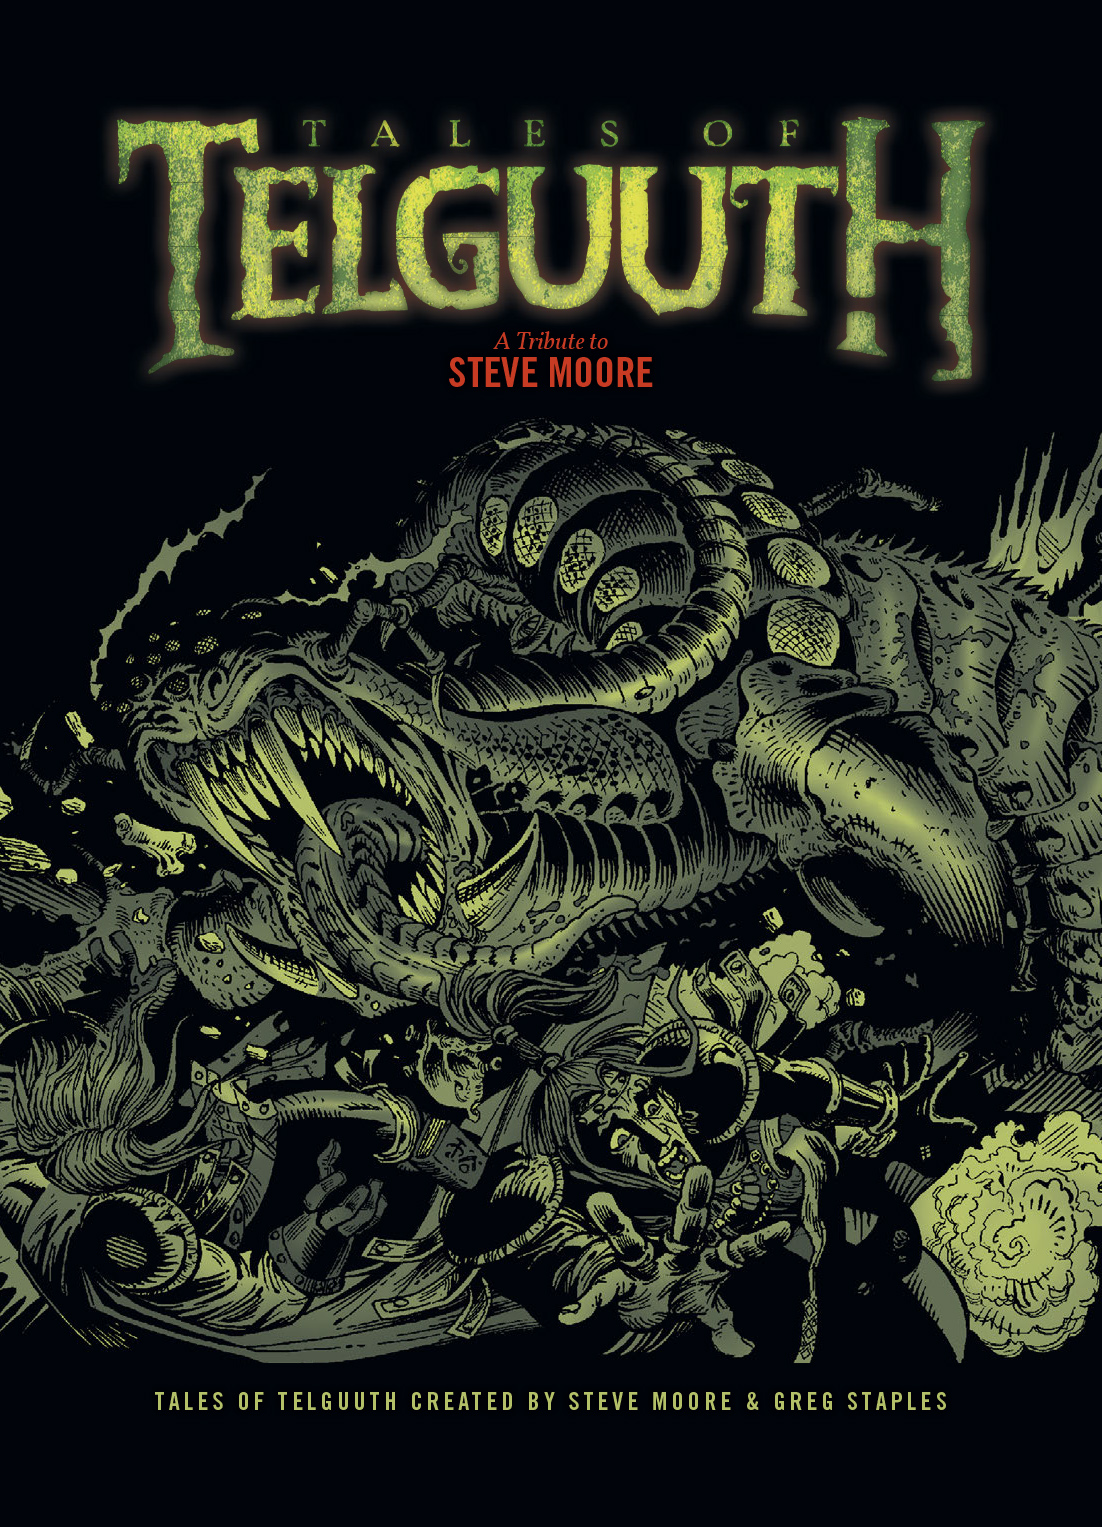 Read online Tales of Telguuth comic -  Issue # TPB - 3